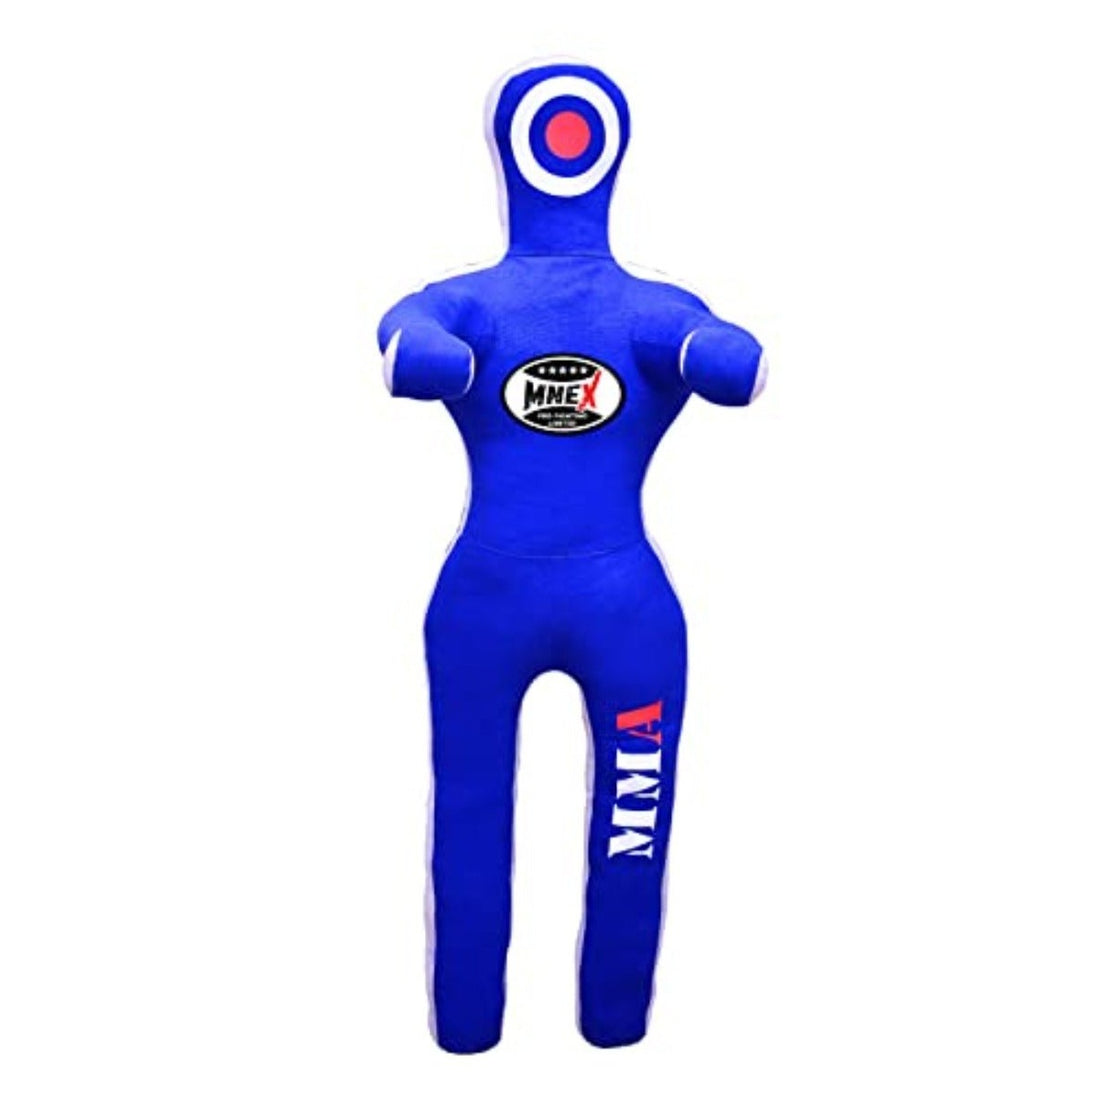 MNEX Pro Fighting Wrestling Dummy Grappling Dummies - 5ft/60 inches 6ft/72 inches Jujitsu BJJ Dummy MMA Dummies Judo Karate Fighting Dummy Un - Filled - Black 6ft / 72" - MNEX PRO FIGHTING LIMITED